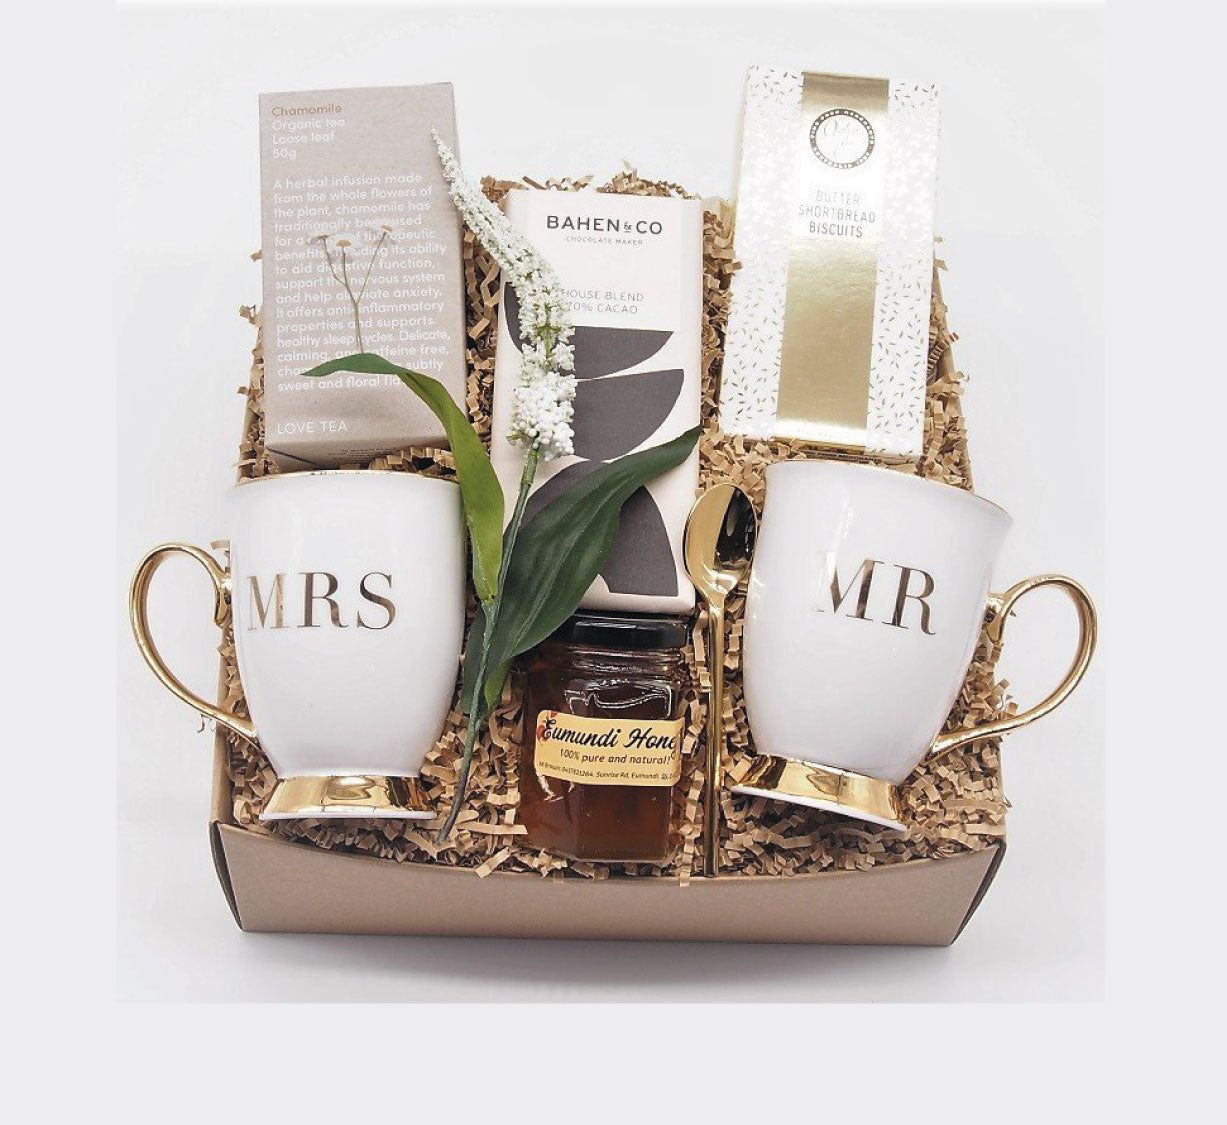 Wedding gift hampers – the perfect wedding gifts in Australia